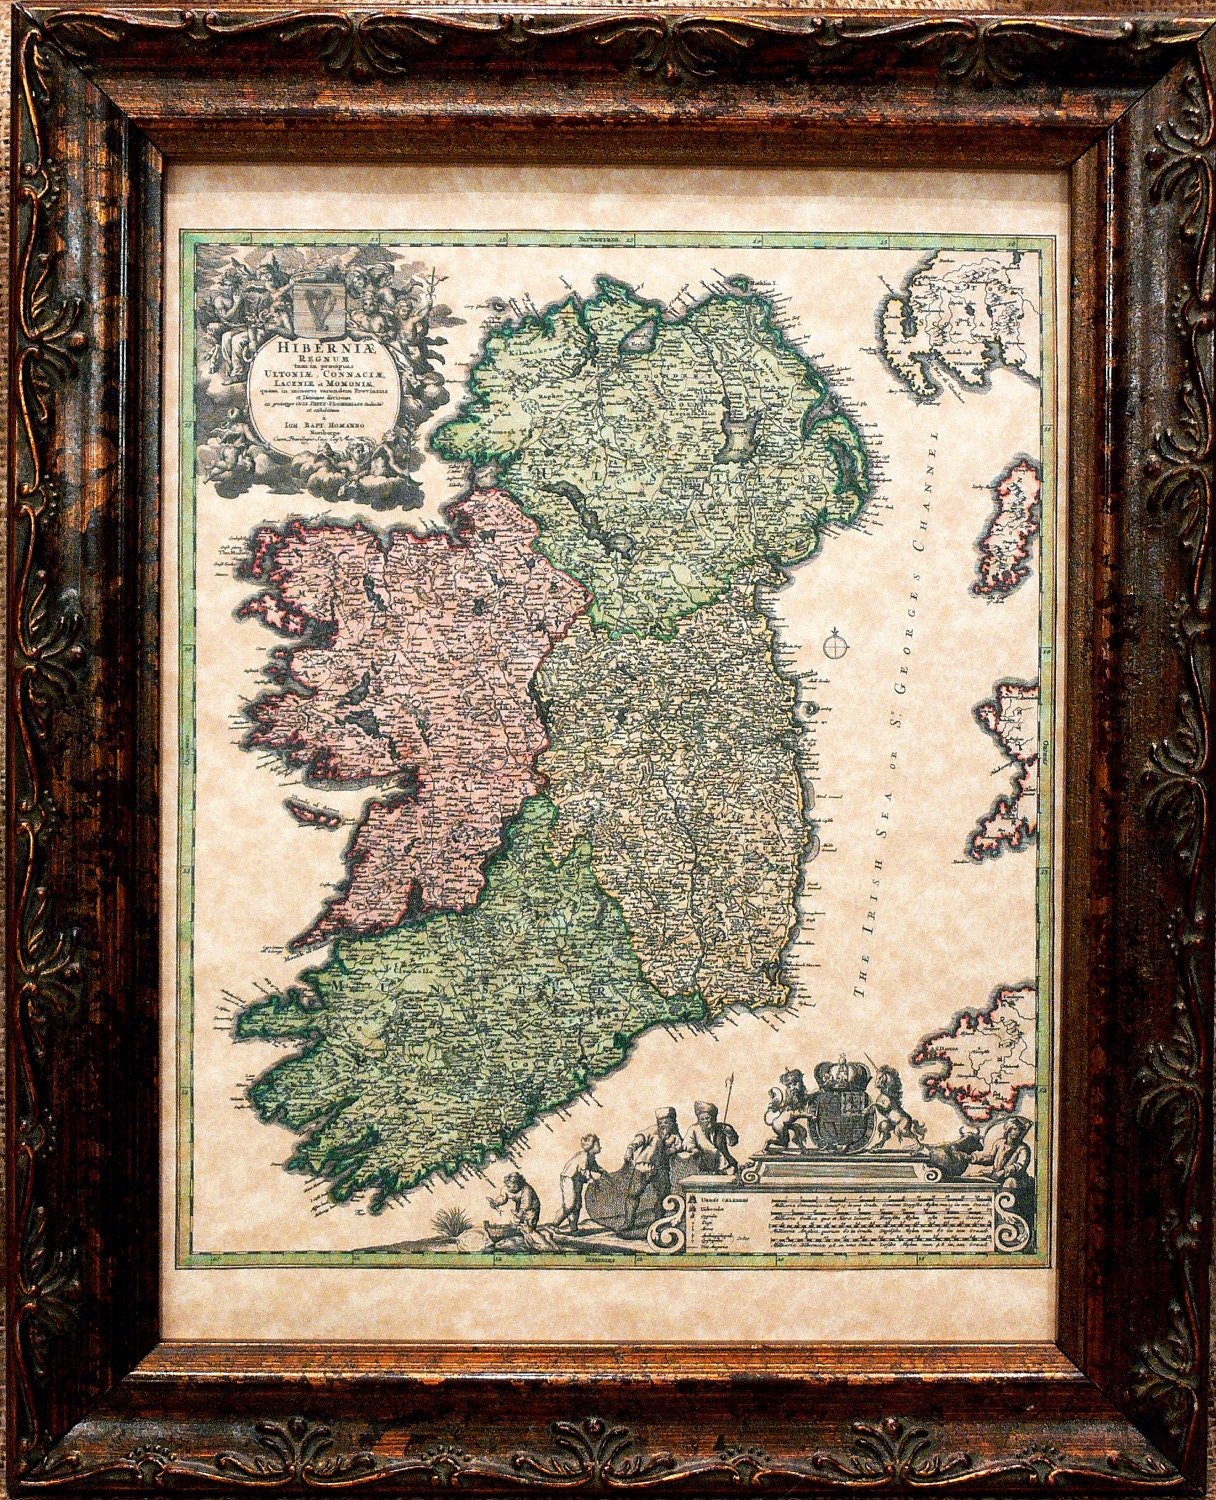 Ireland Map Print of a 1716 Map on Parchment Paper - apageintime